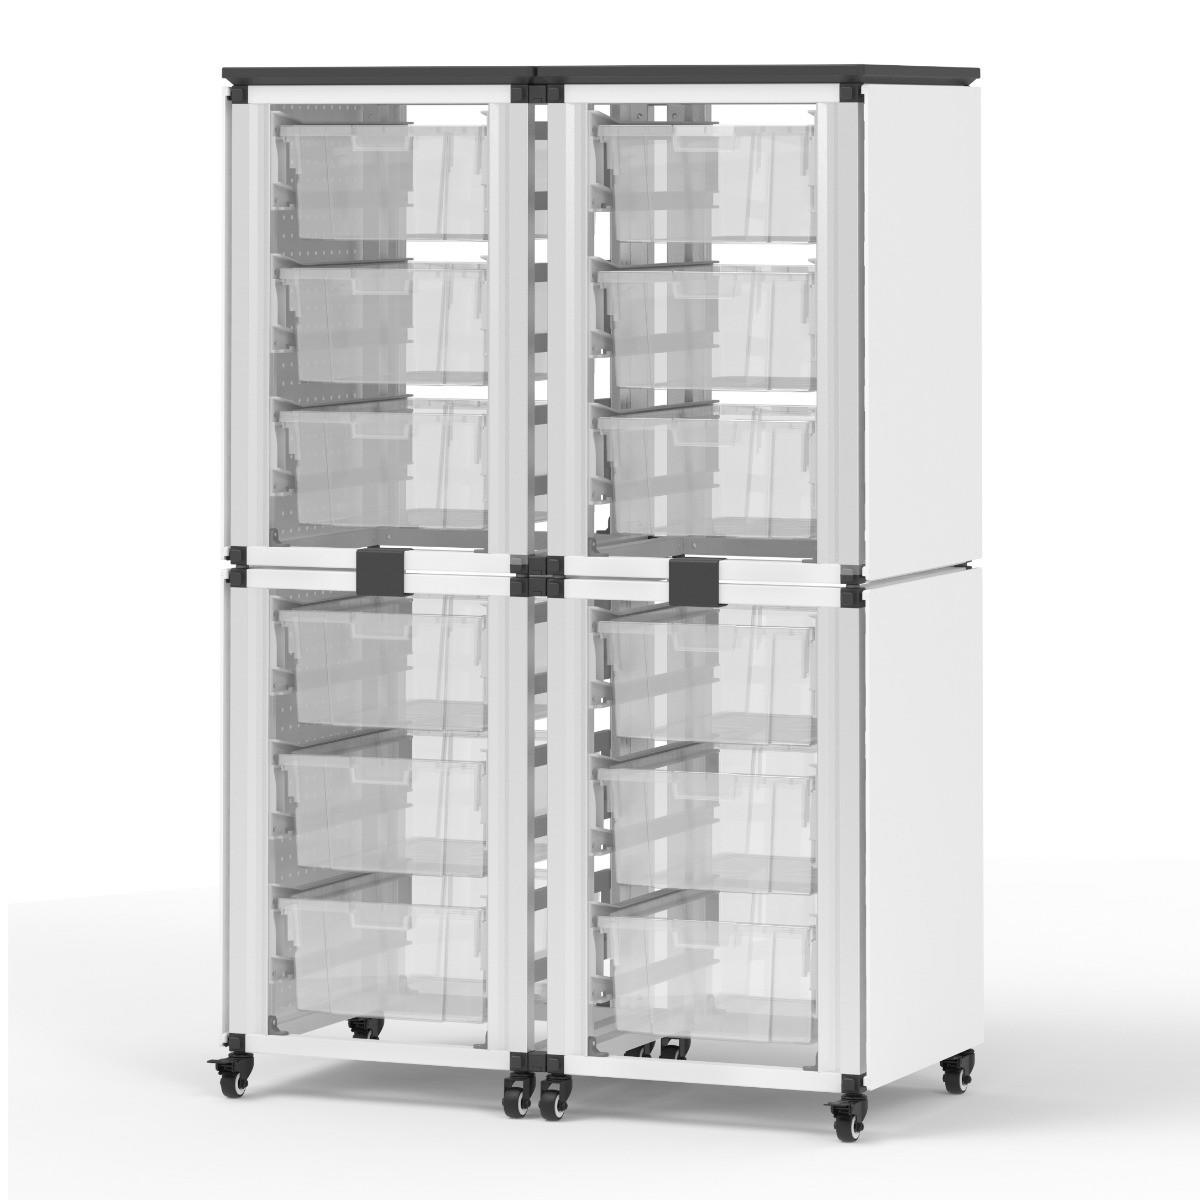 Modular Classroom Storage Cabinet - 4 stacked modules with 12 large ...